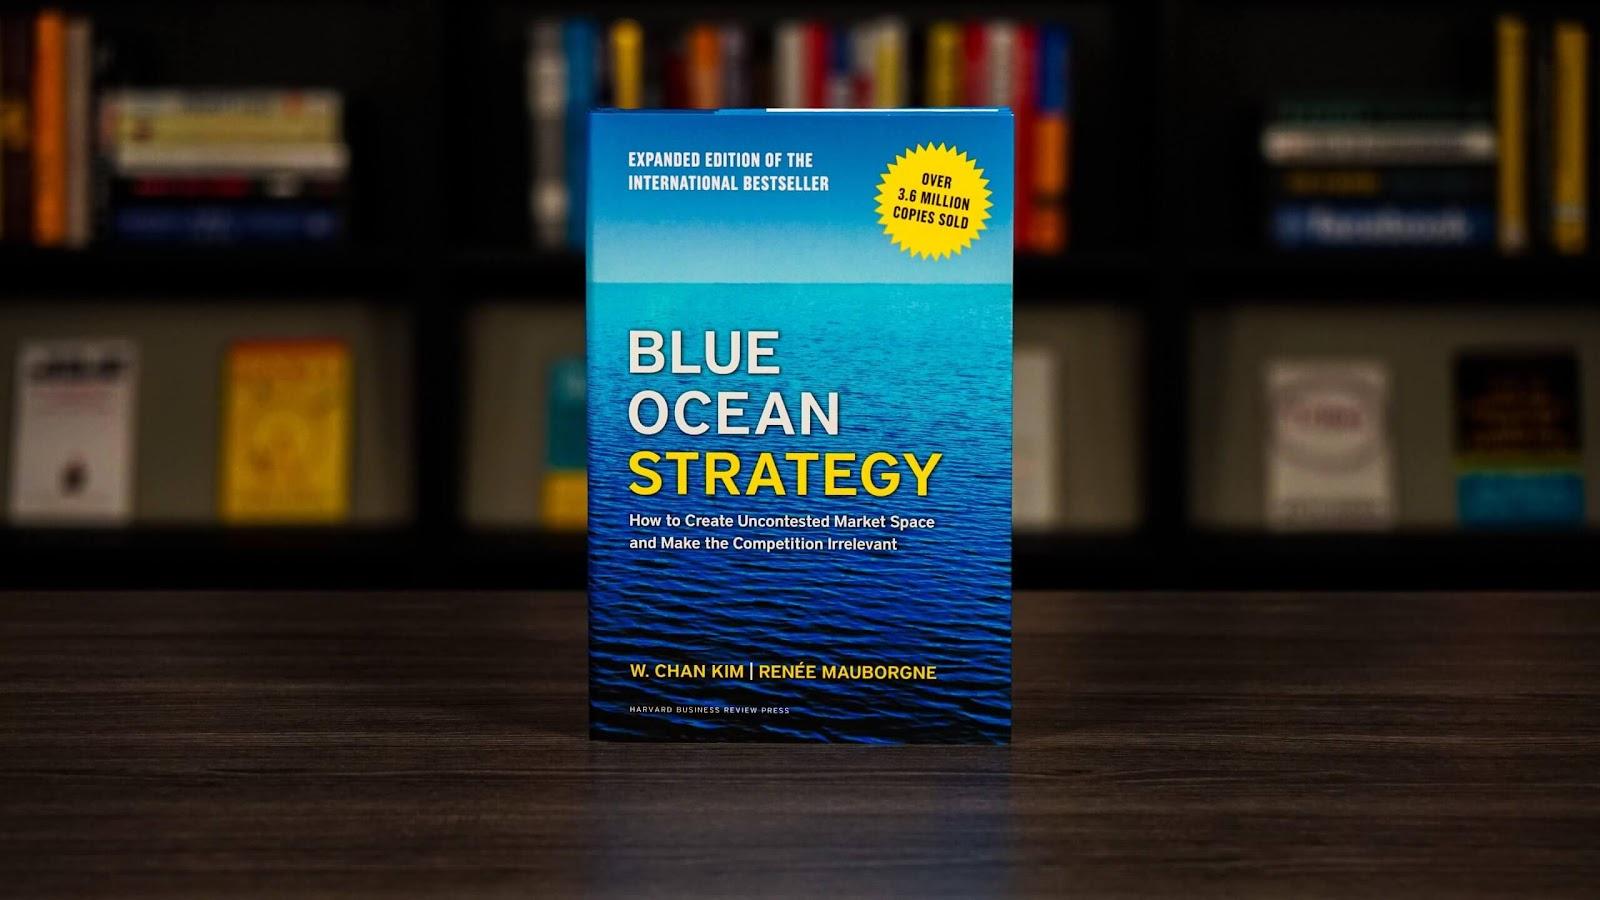 book cover of W. Chan Kim's "Blue Ocean Strategy"